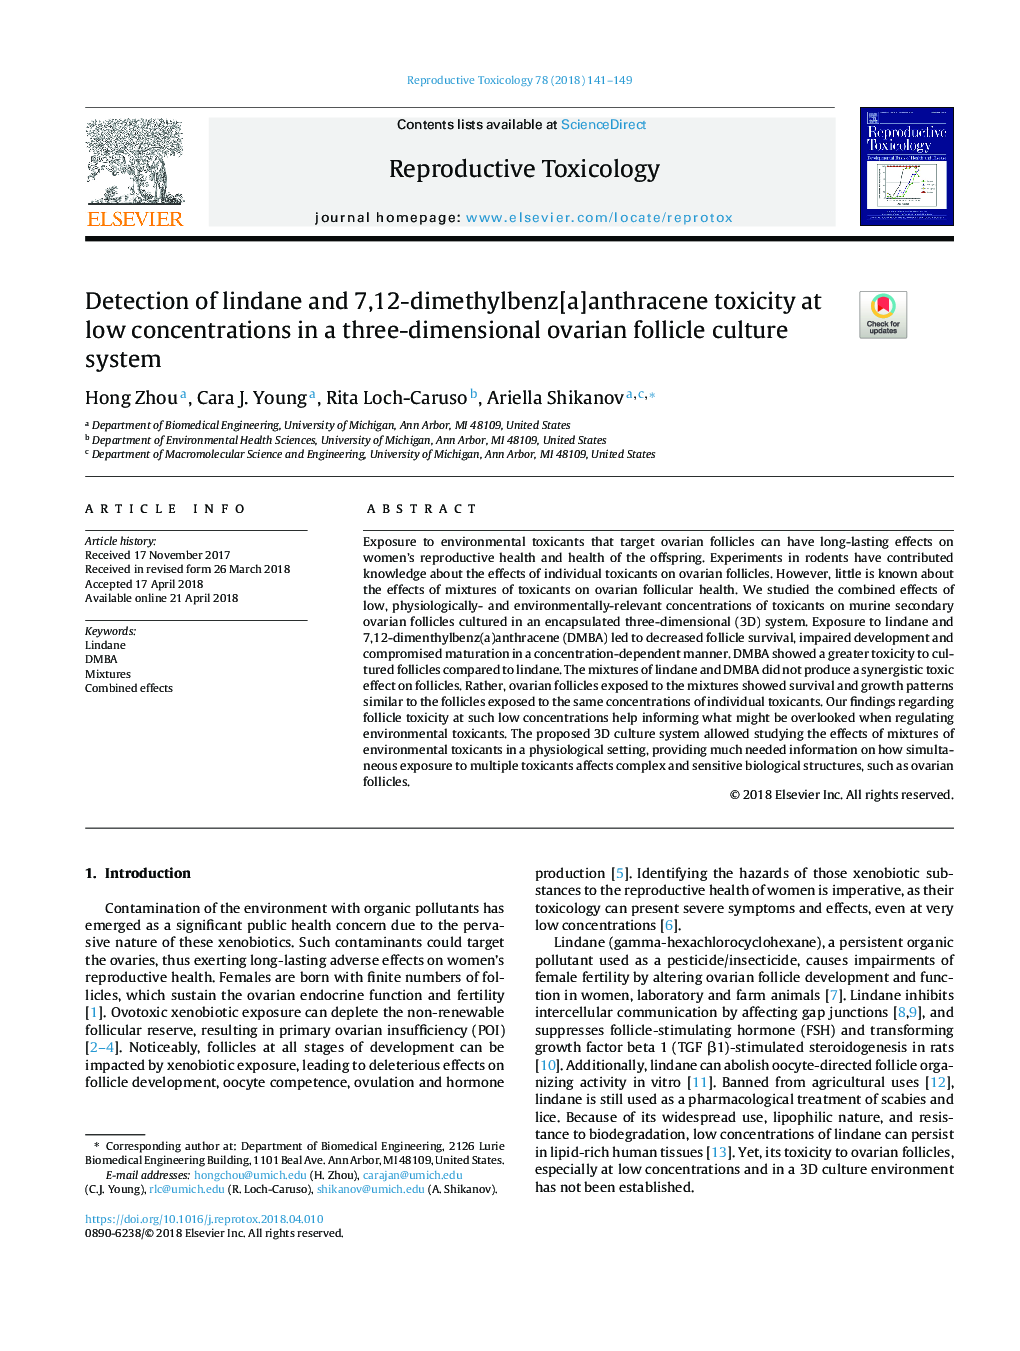 Detection of lindane and 7,12-dimethylbenz[a]anthracene toxicity at low concentrations in a three-dimensional ovarian follicle culture system